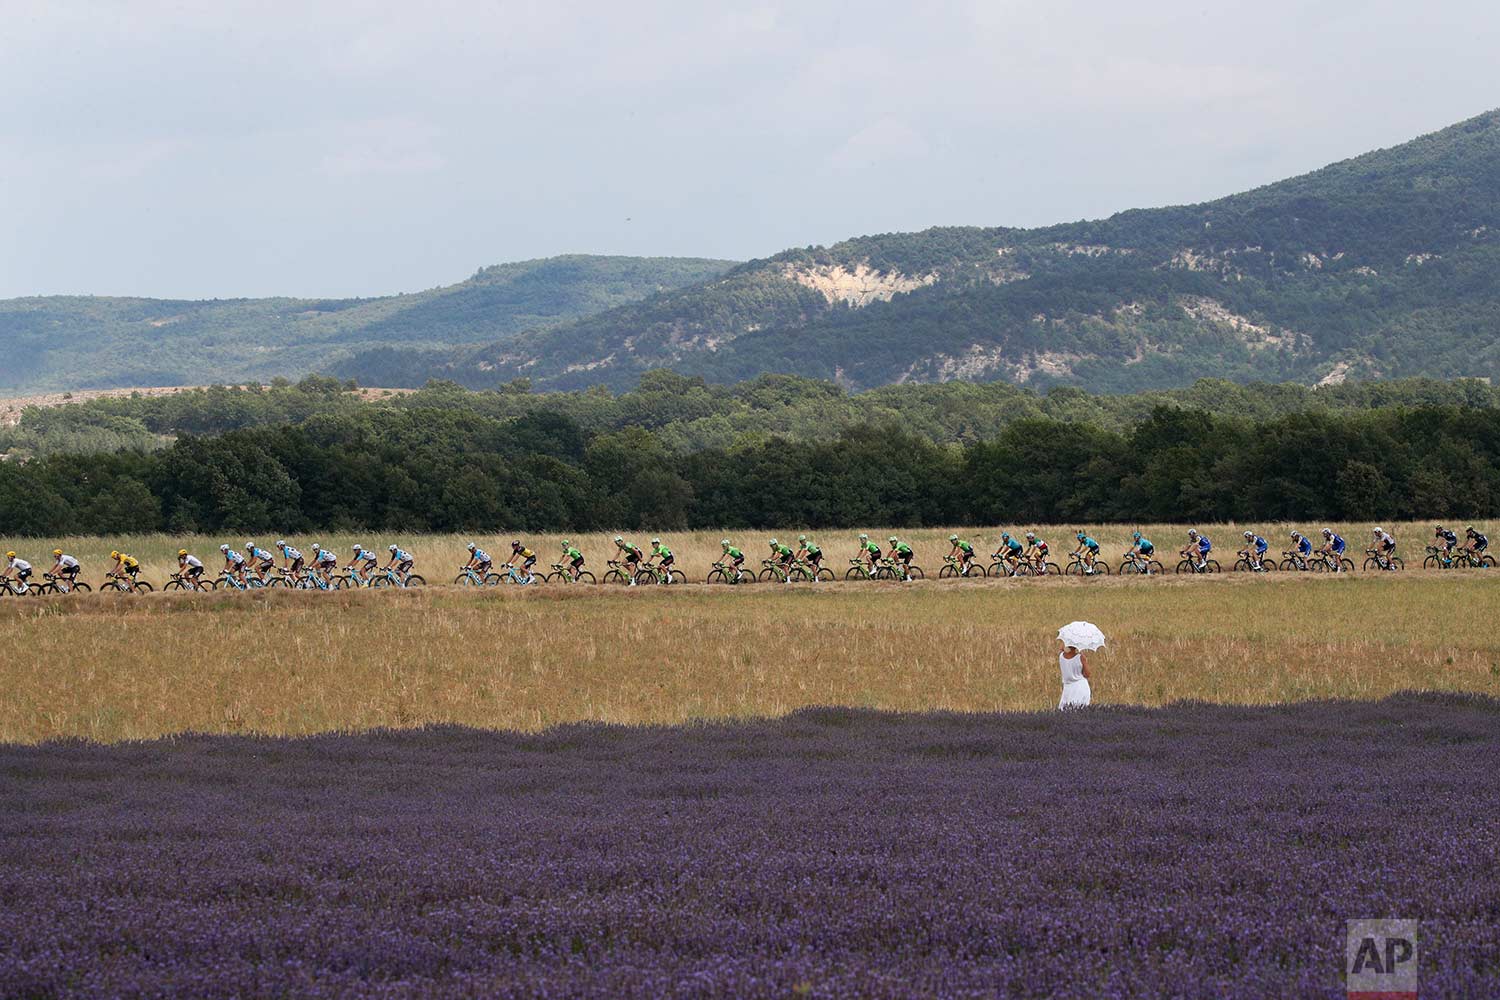  In this Friday, July 21, 2017 photo, a woman with an umbrella stands next to a lavender field as she watches the riders pass during the nineteenth stage of the Tour de France cycling race over 222.5 kilometers (138.3 miles) with start in Embrun and 